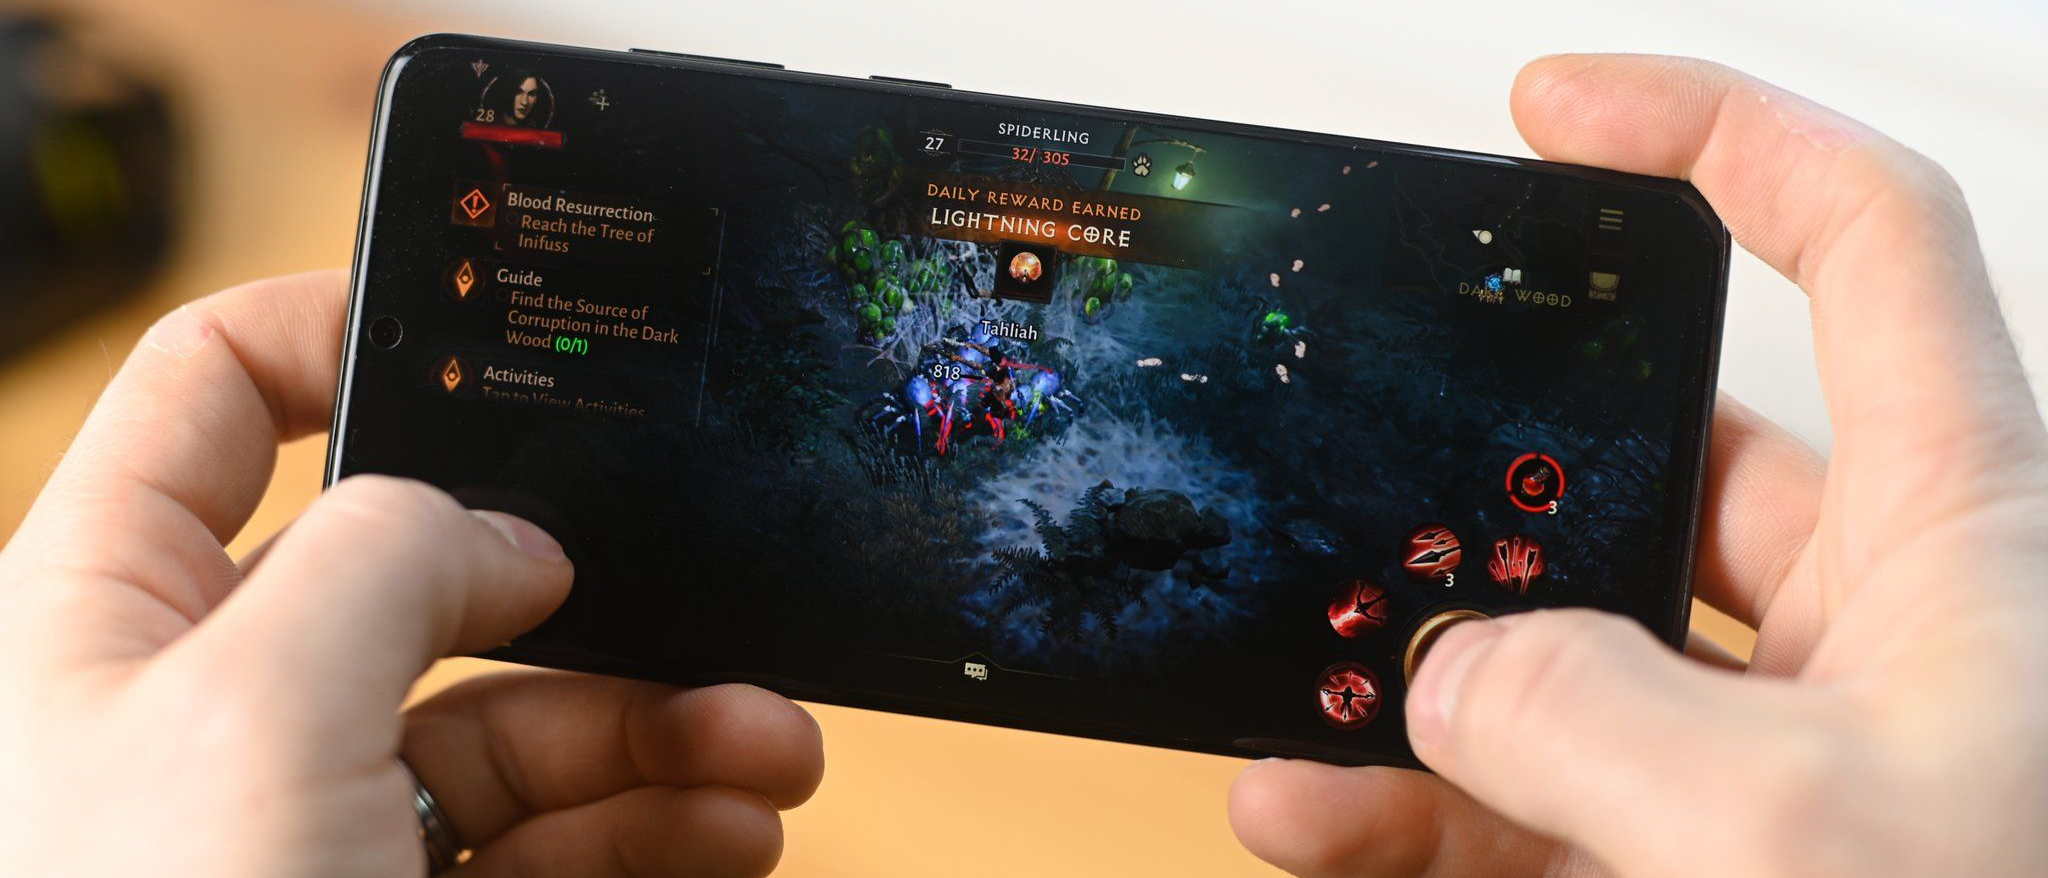 Diablo Immortal is coming to PC, for those guys that don't have phones